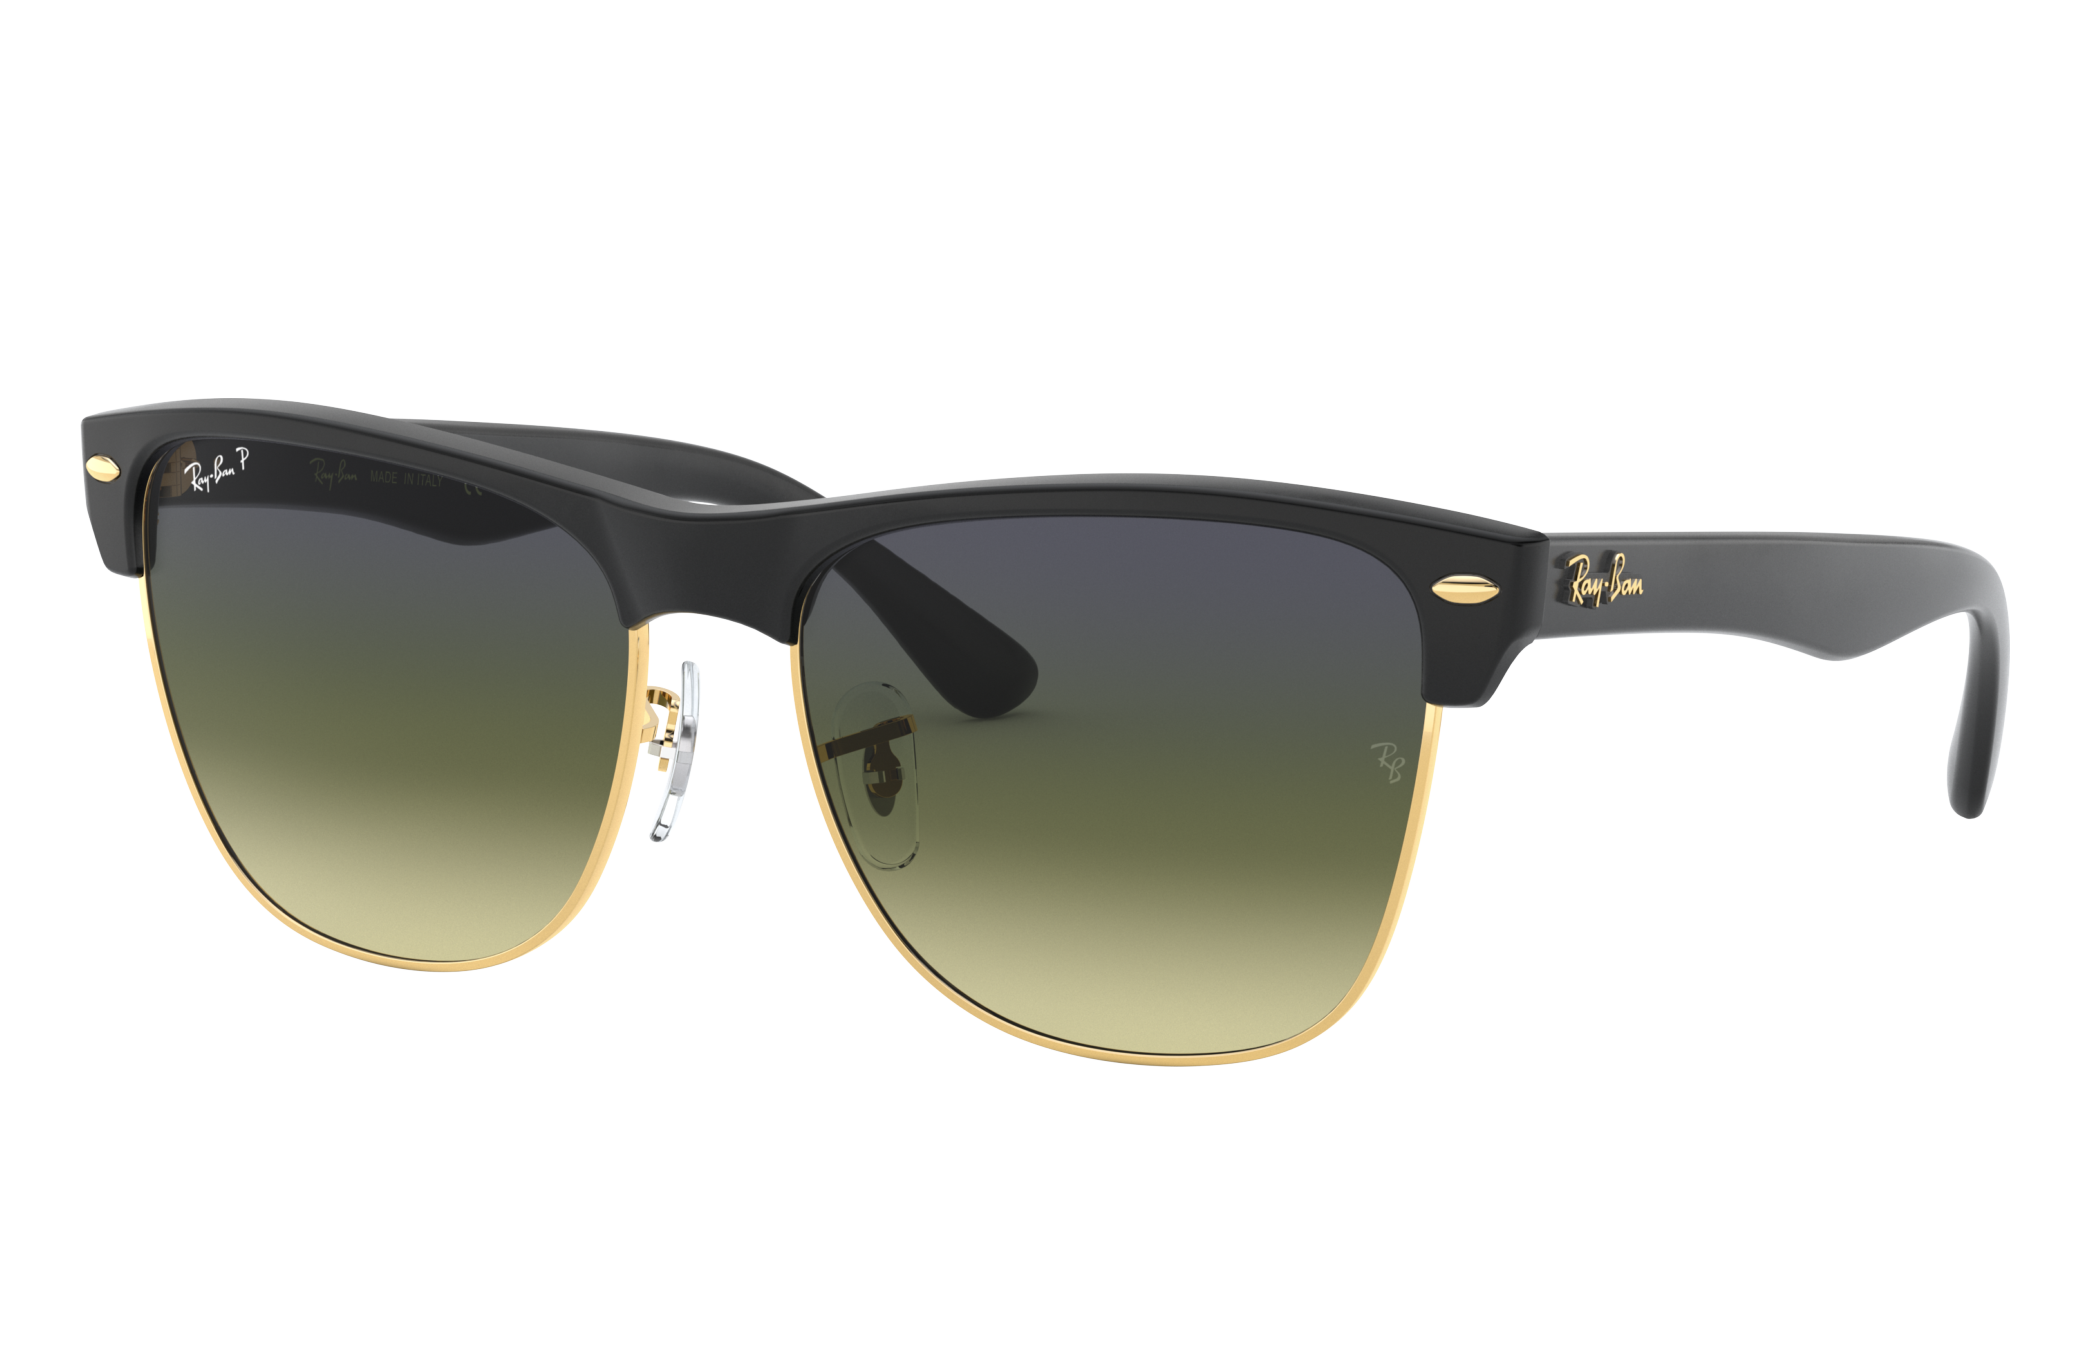 Clubmaster Oversized Sunglasses in Black and Blue/Green - RB4175 | Ray-Ban®